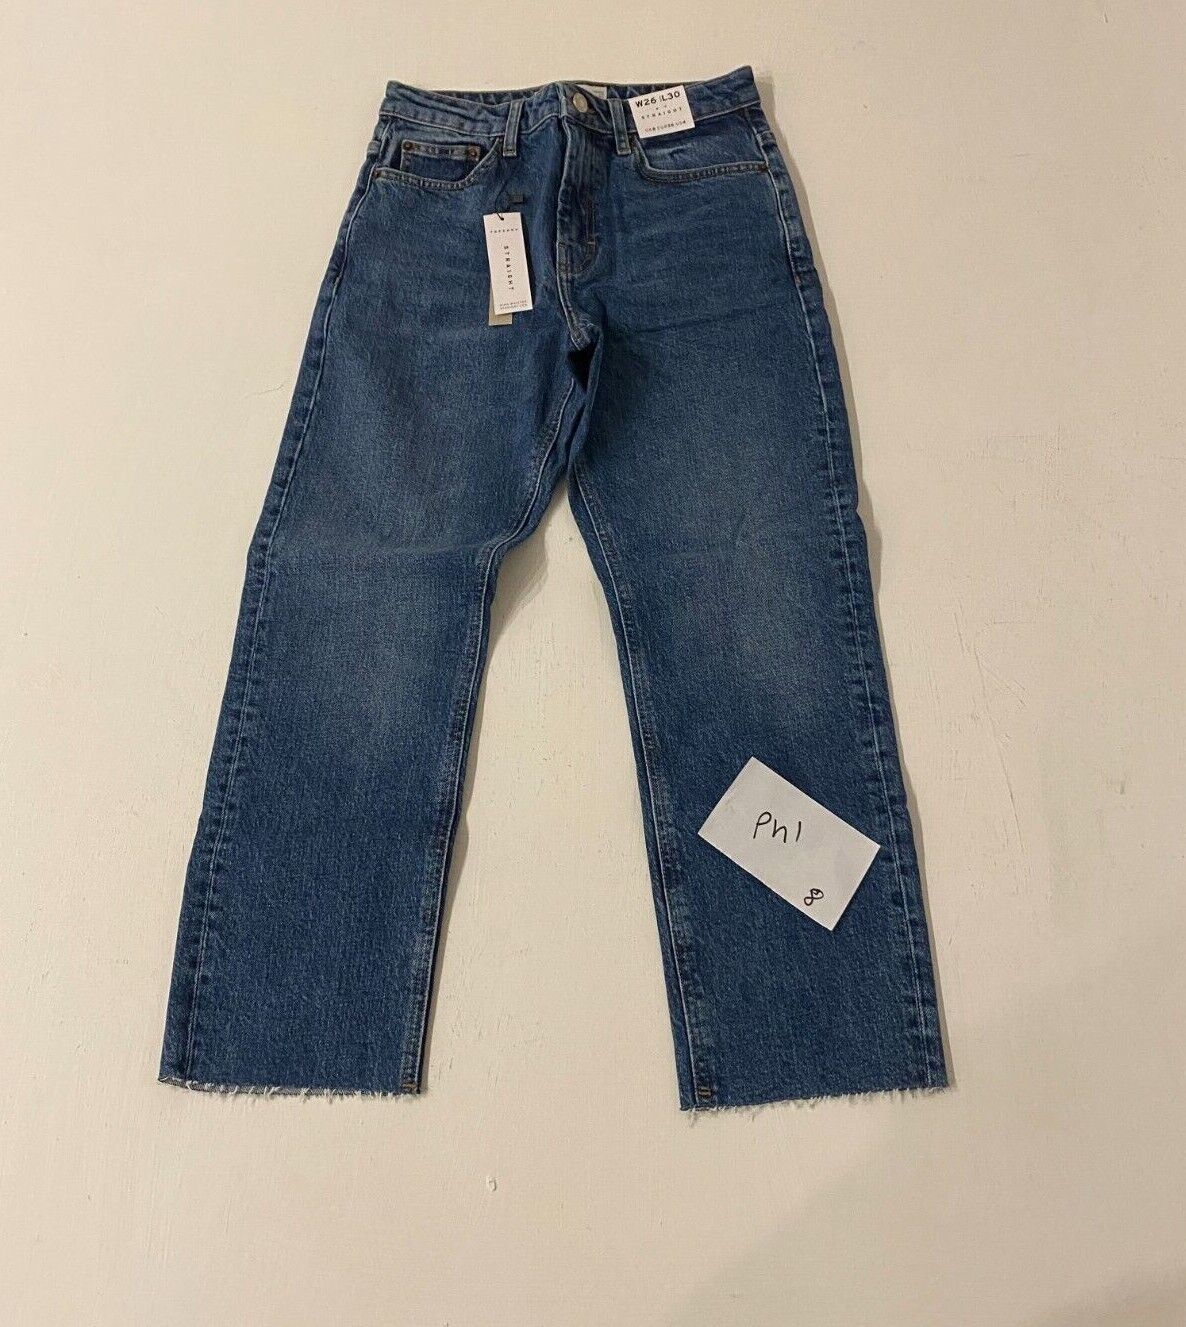 Primary image for TOPSHOP Straight Leg High Waisted Jeans in Blue (ph1)